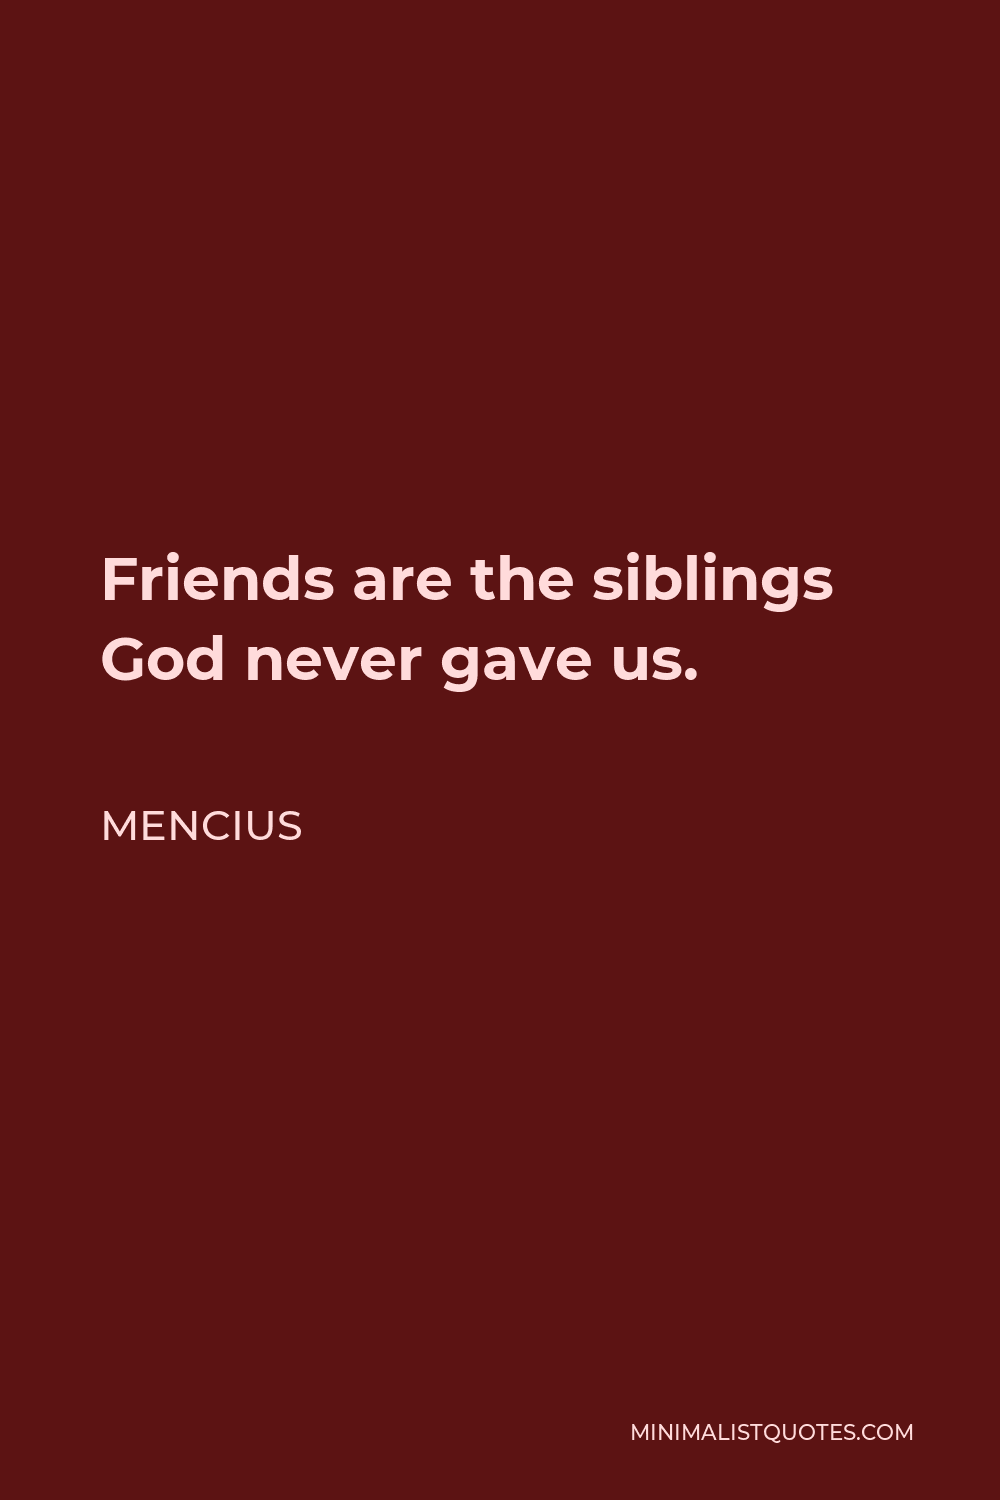 Mencius Quote - Friends are the siblings God never gave us.